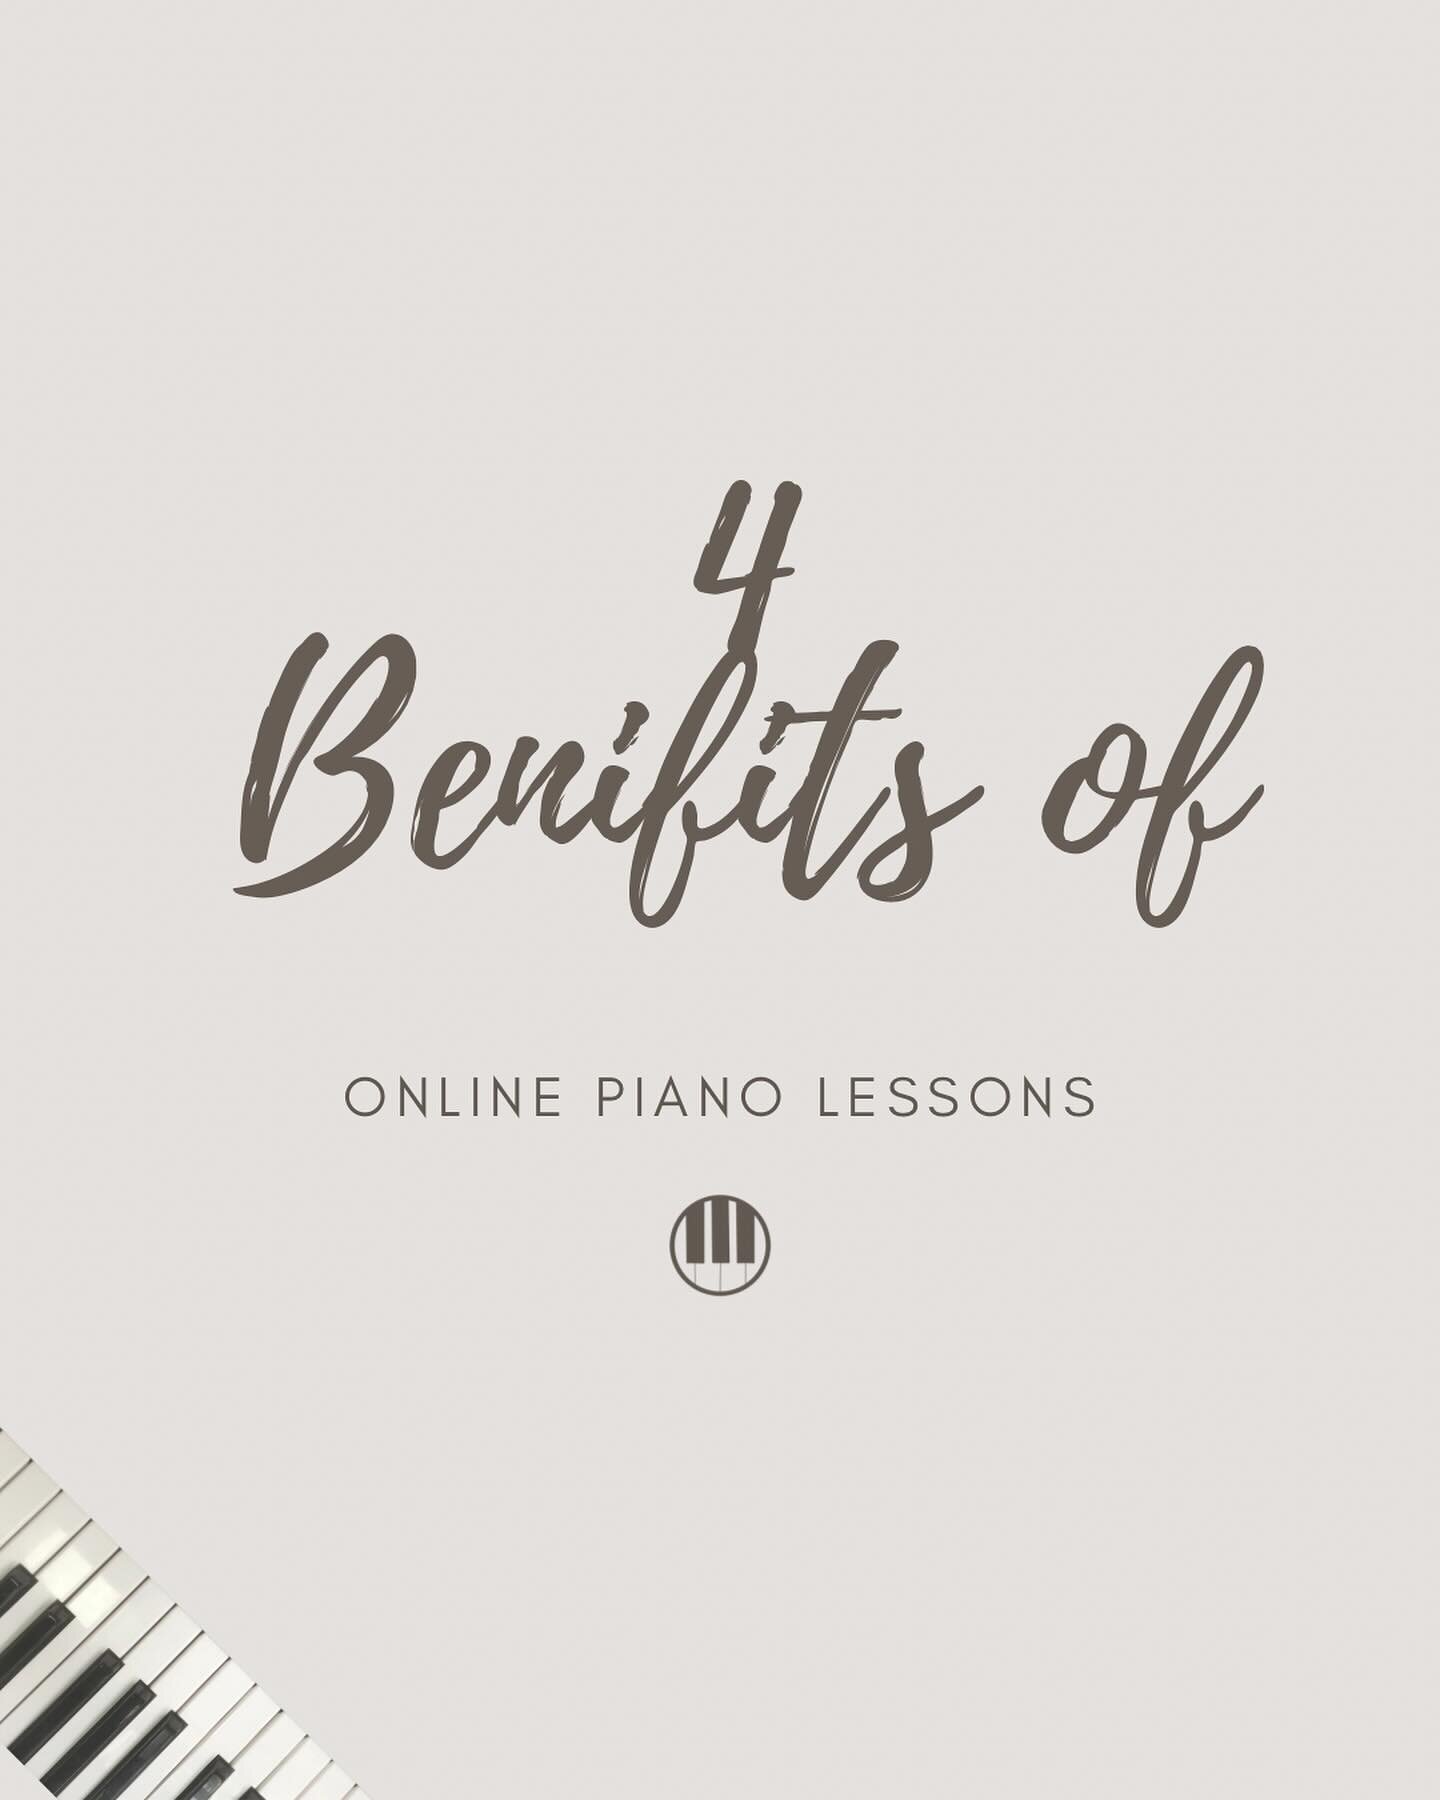 There are many pros to learning online. Here are just a few.

#homeschoolmusiclessons #homeschoolmusic #piano #pianomusic #pianoteacher #onlinelessons #onlinepianocourse #onlinepianolessonsforkids